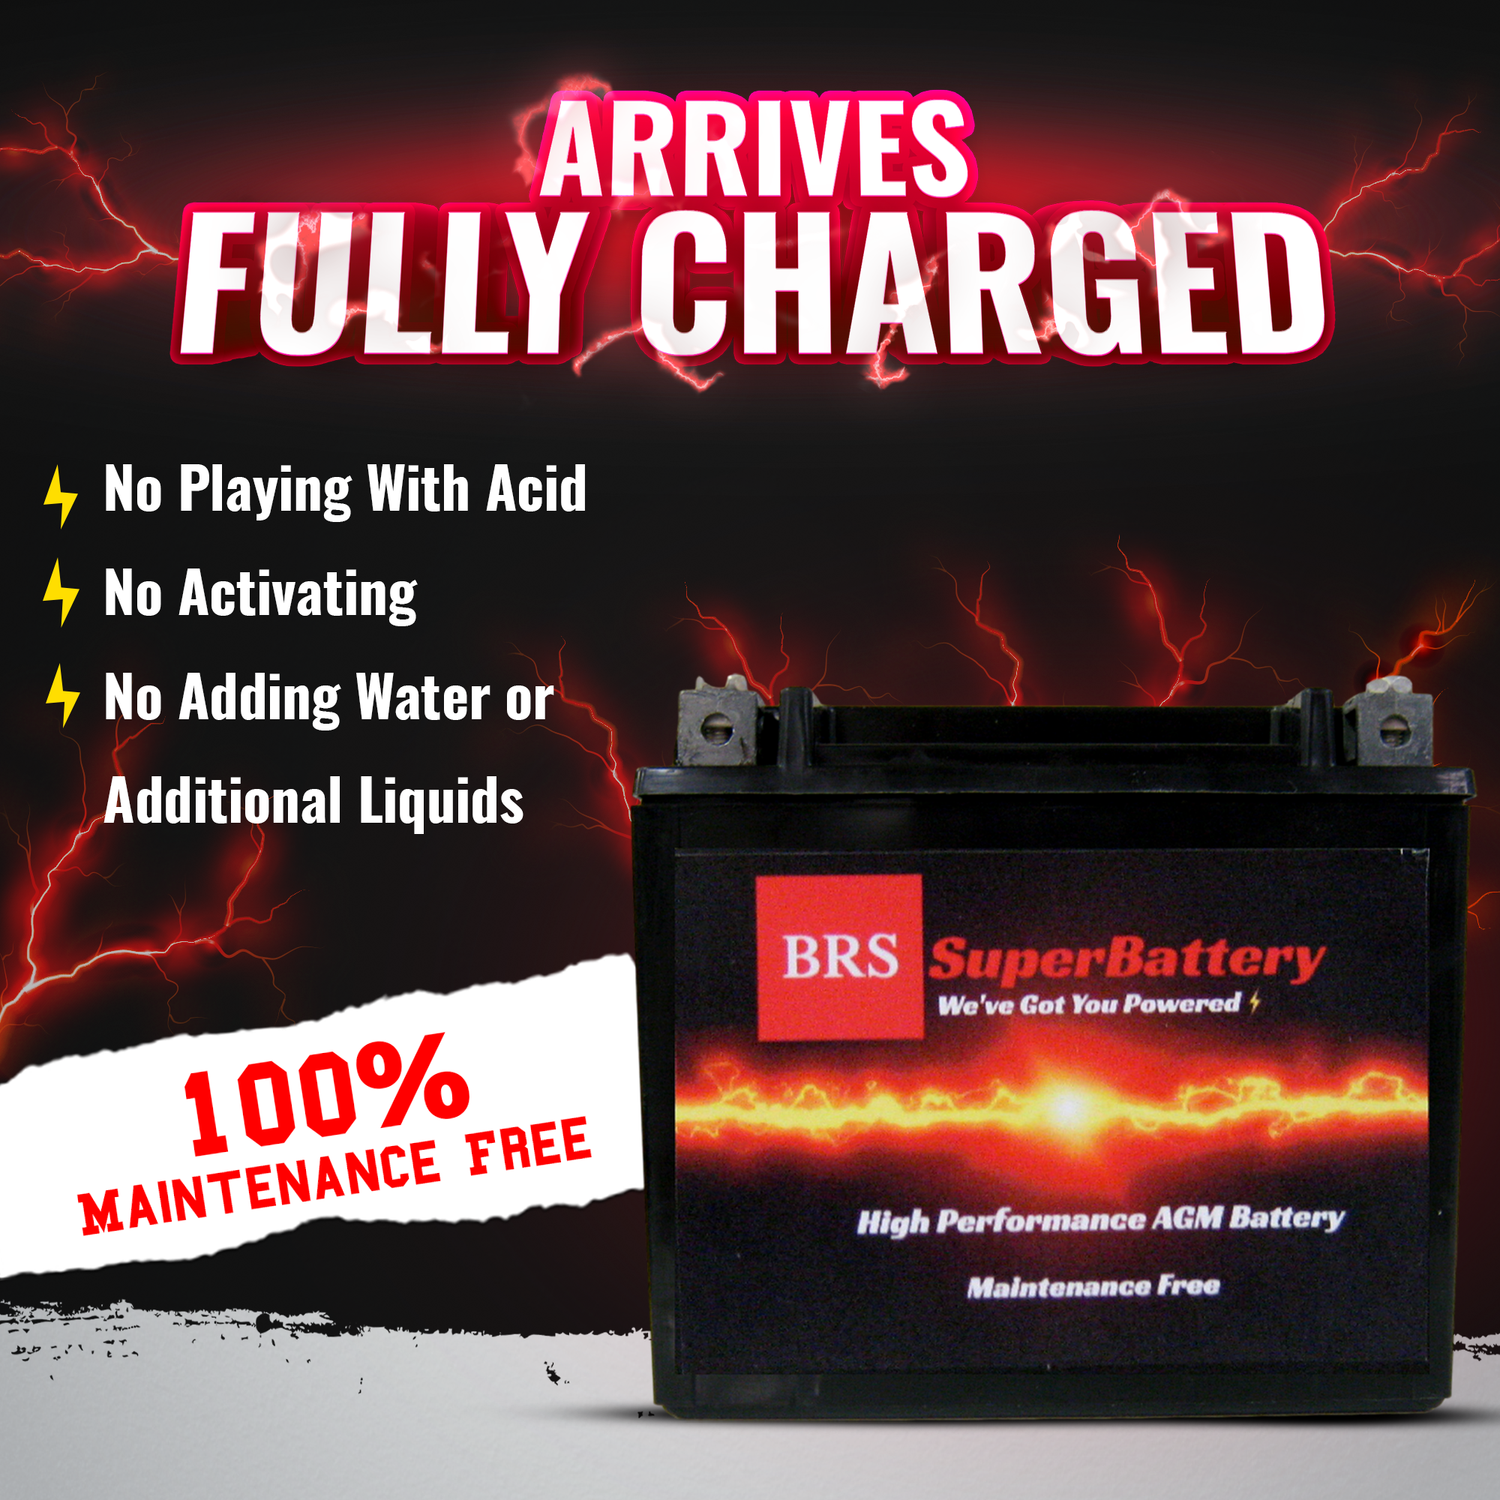 High Performance BRS20HL-BS 2 Year Battery & Smart Charger / Maintainer Combo Bundle Kit 12v Sealed AGM PowerSports Battery - BRS Super Battery